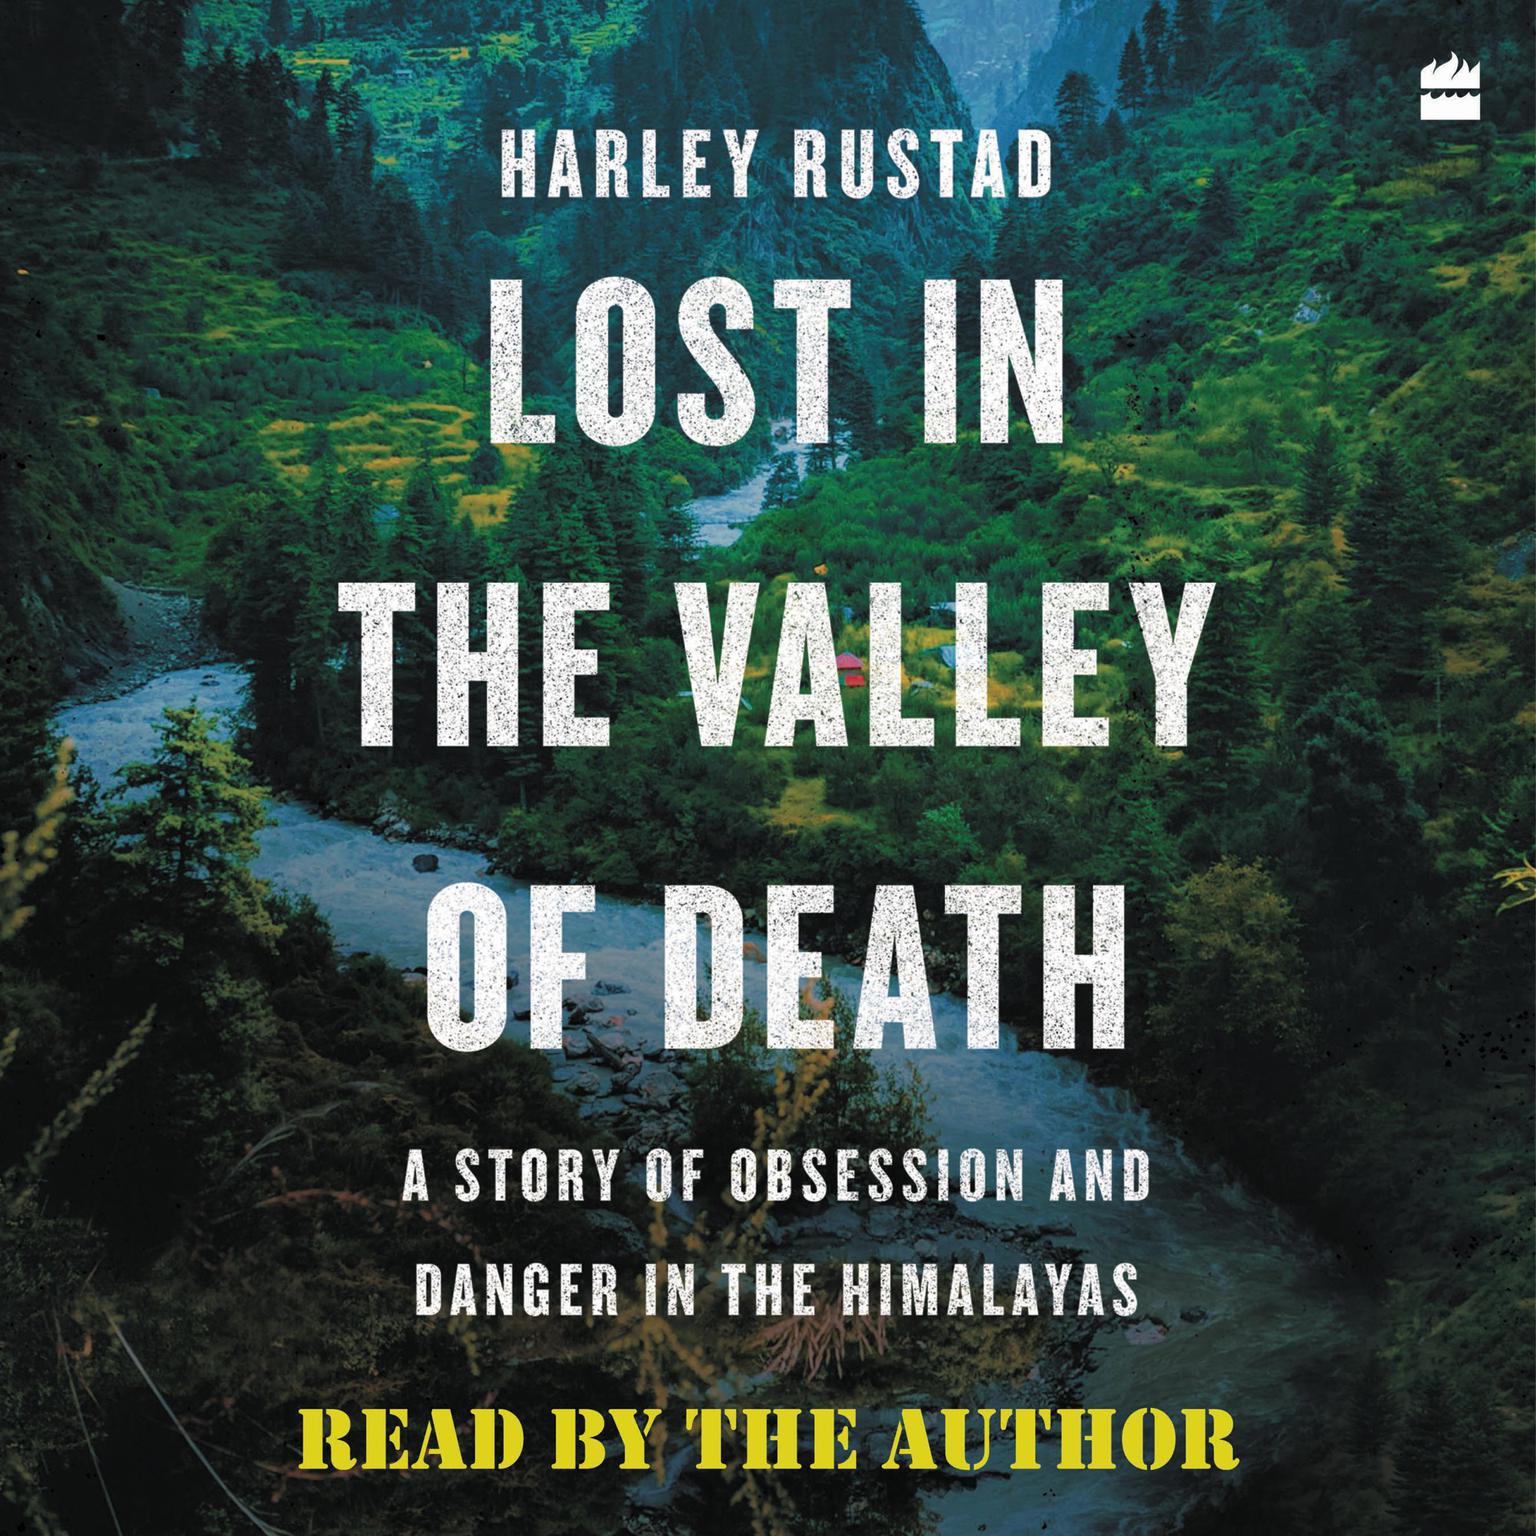 Lost in the Valley of Death: A Story of Obsession and Danger in the Himalayas Audiobook, by Harley Rustad